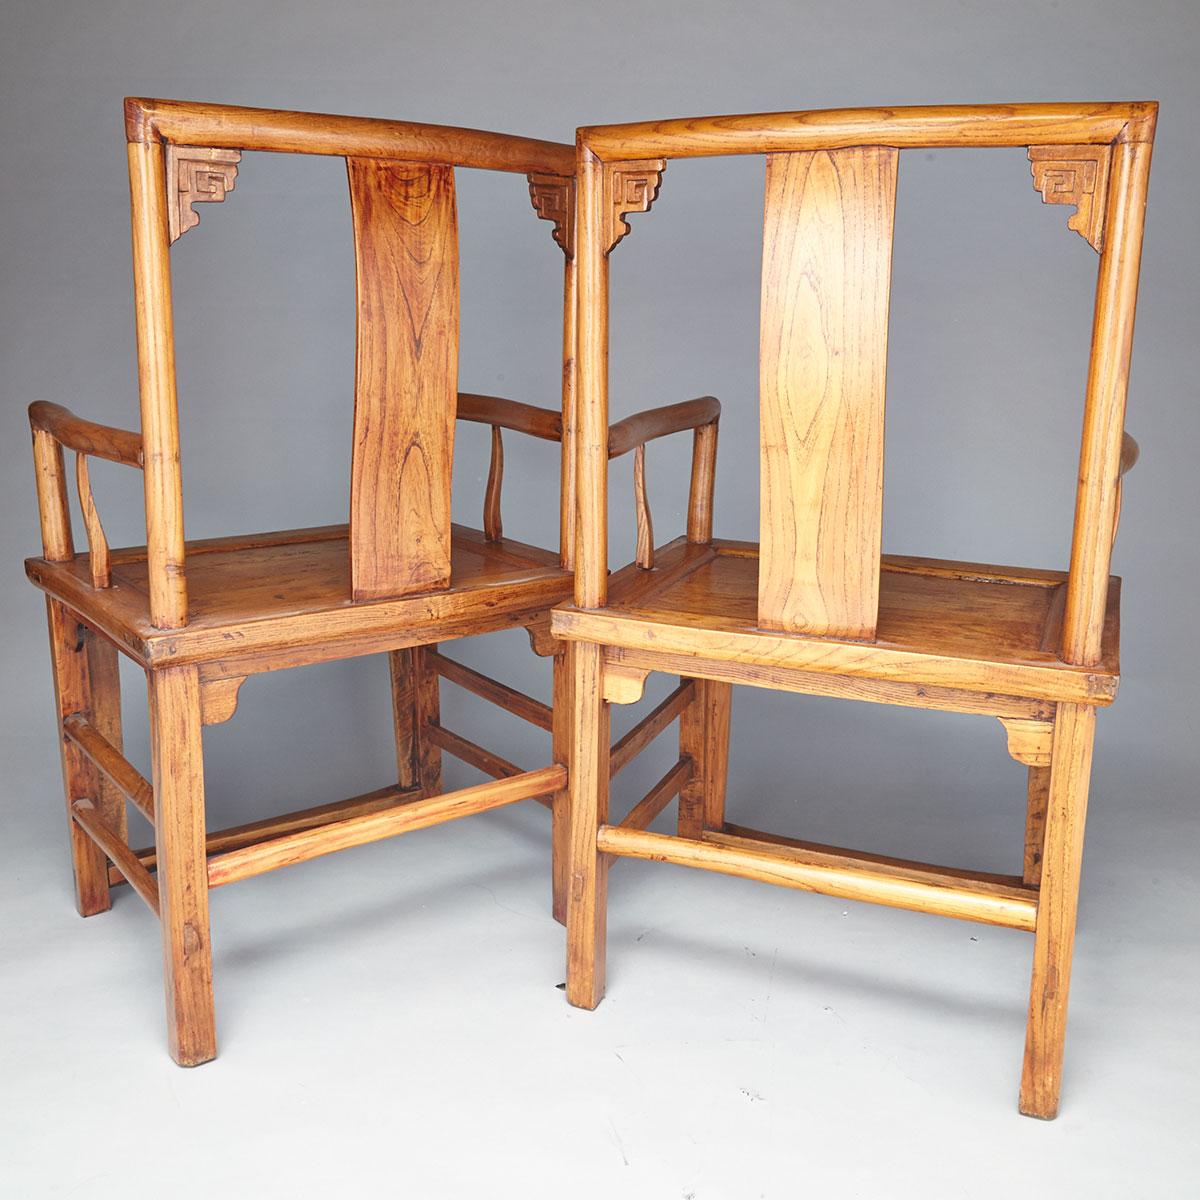 Pair of Elm Wood Arm Chairs, Early 20th Century